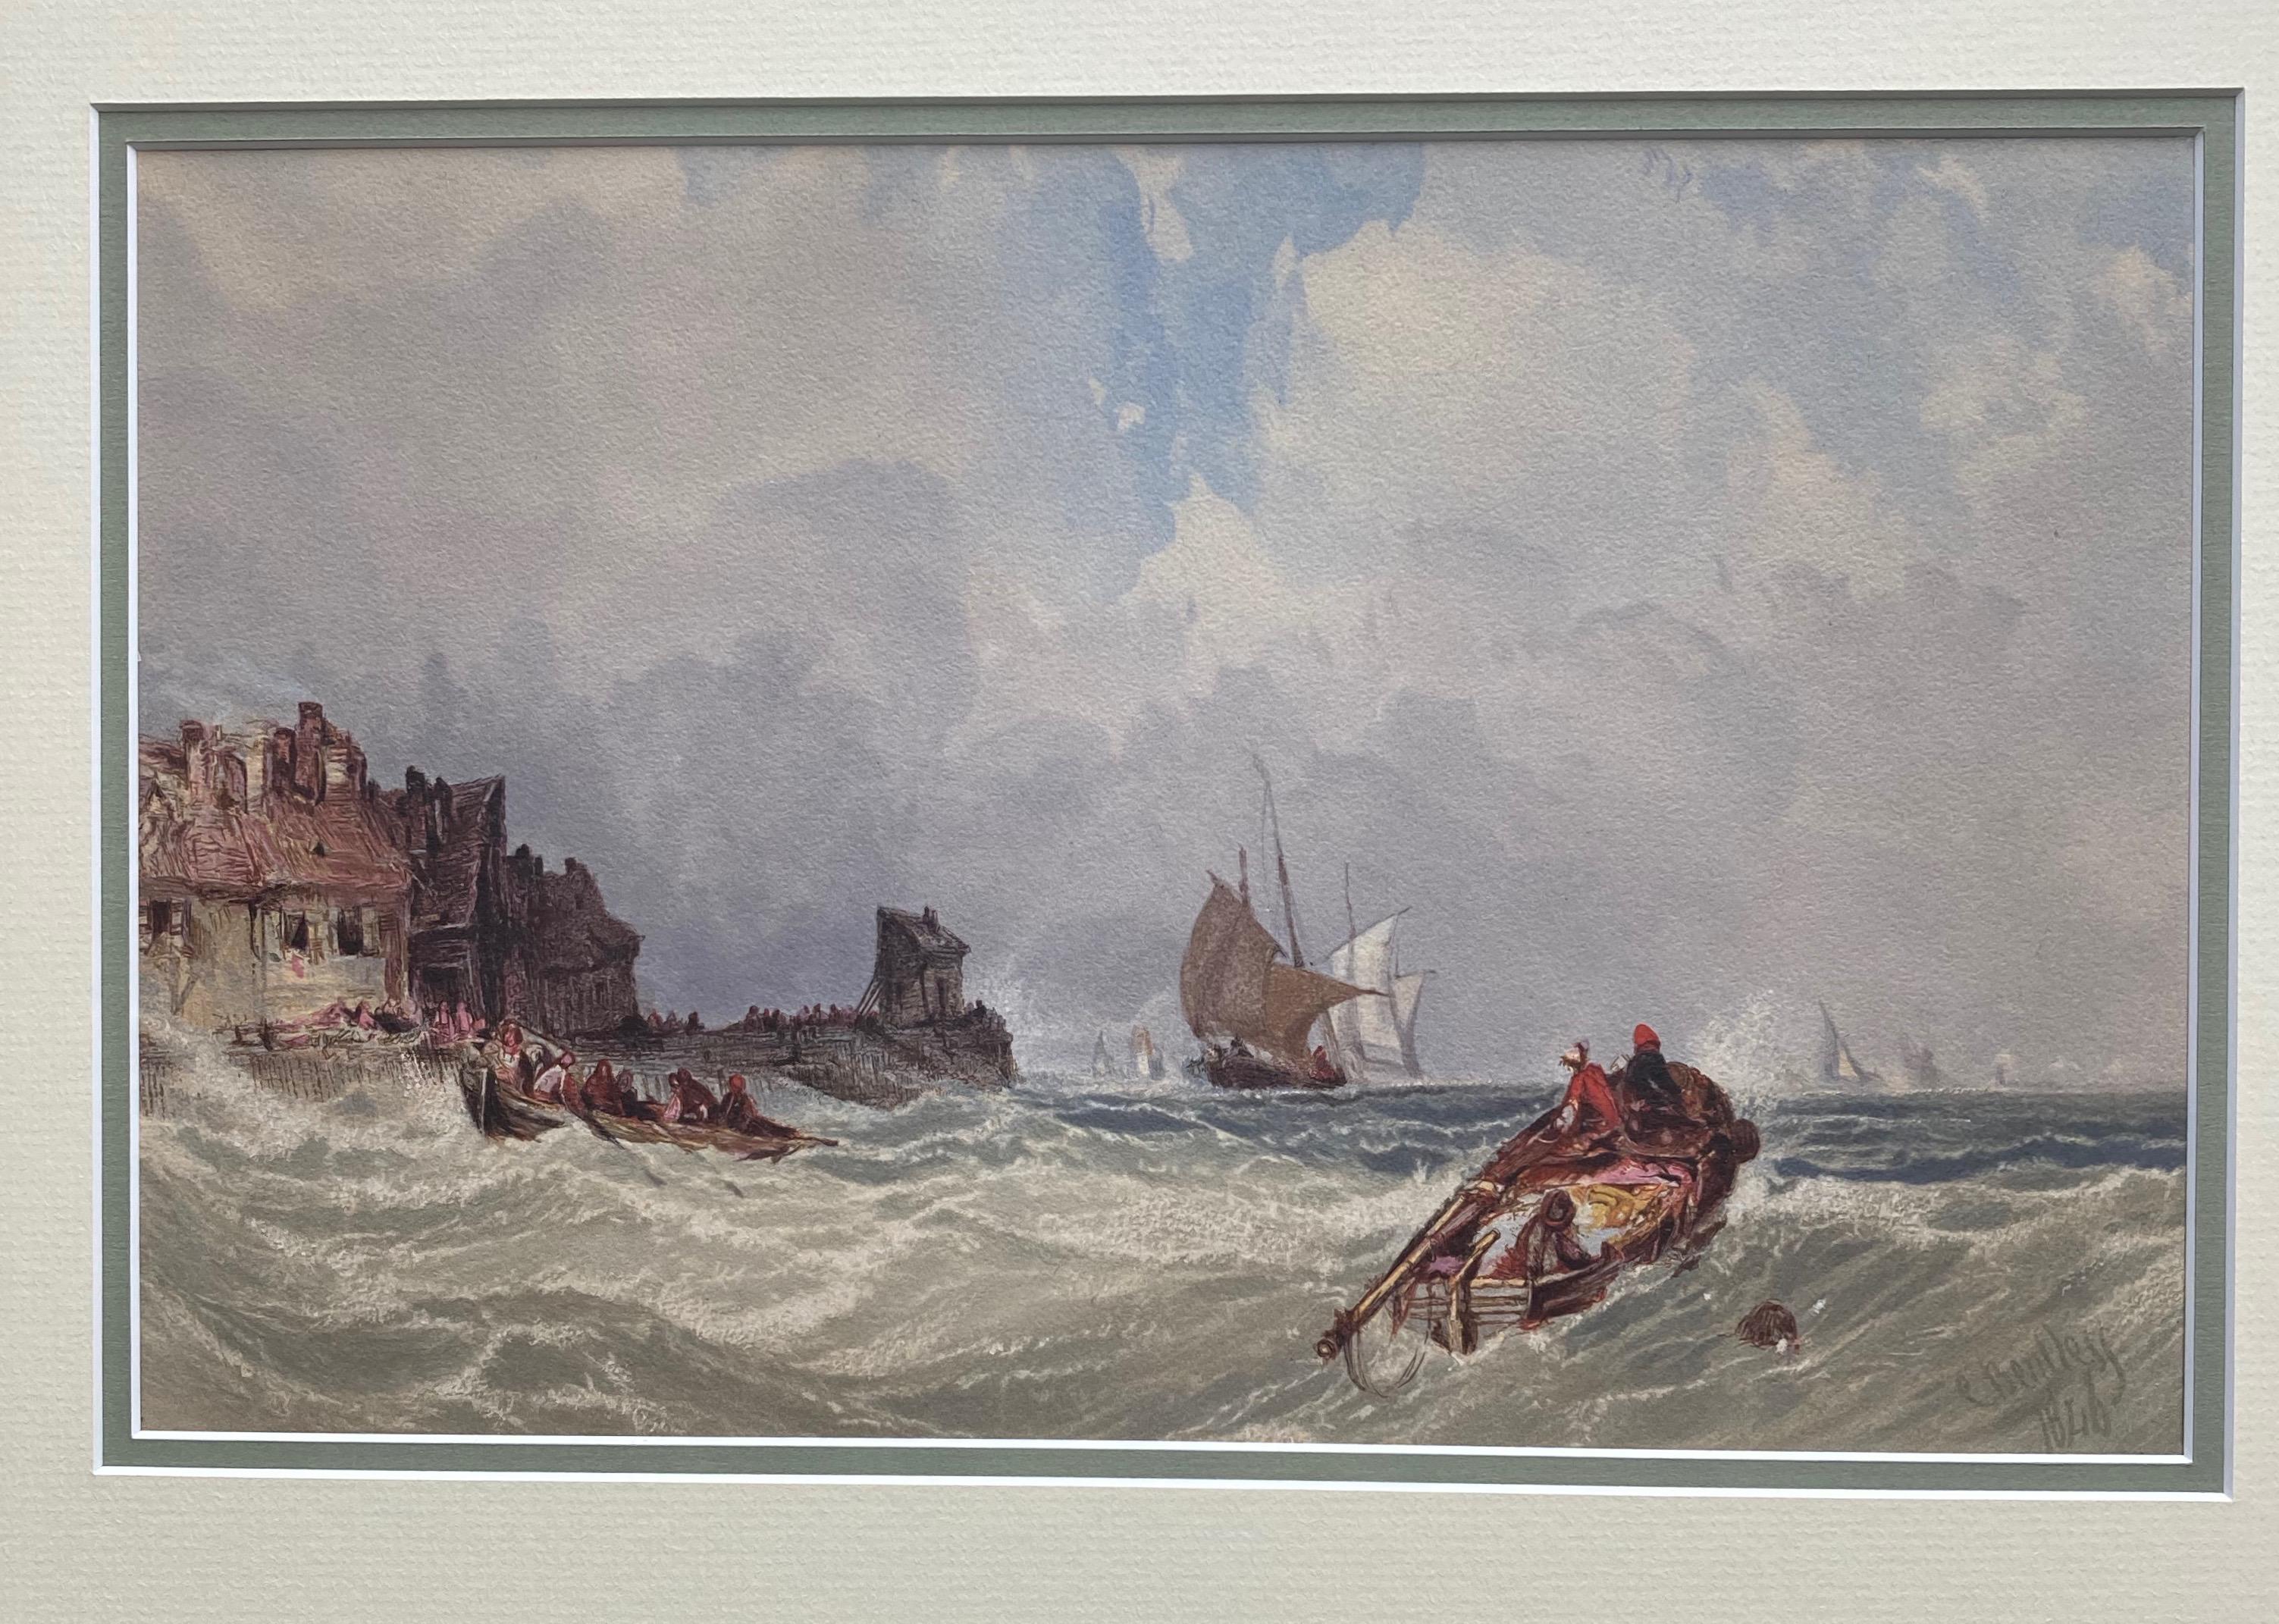 Charles Bentley, Marine scene with vessels in choppy seas near a harbour  1